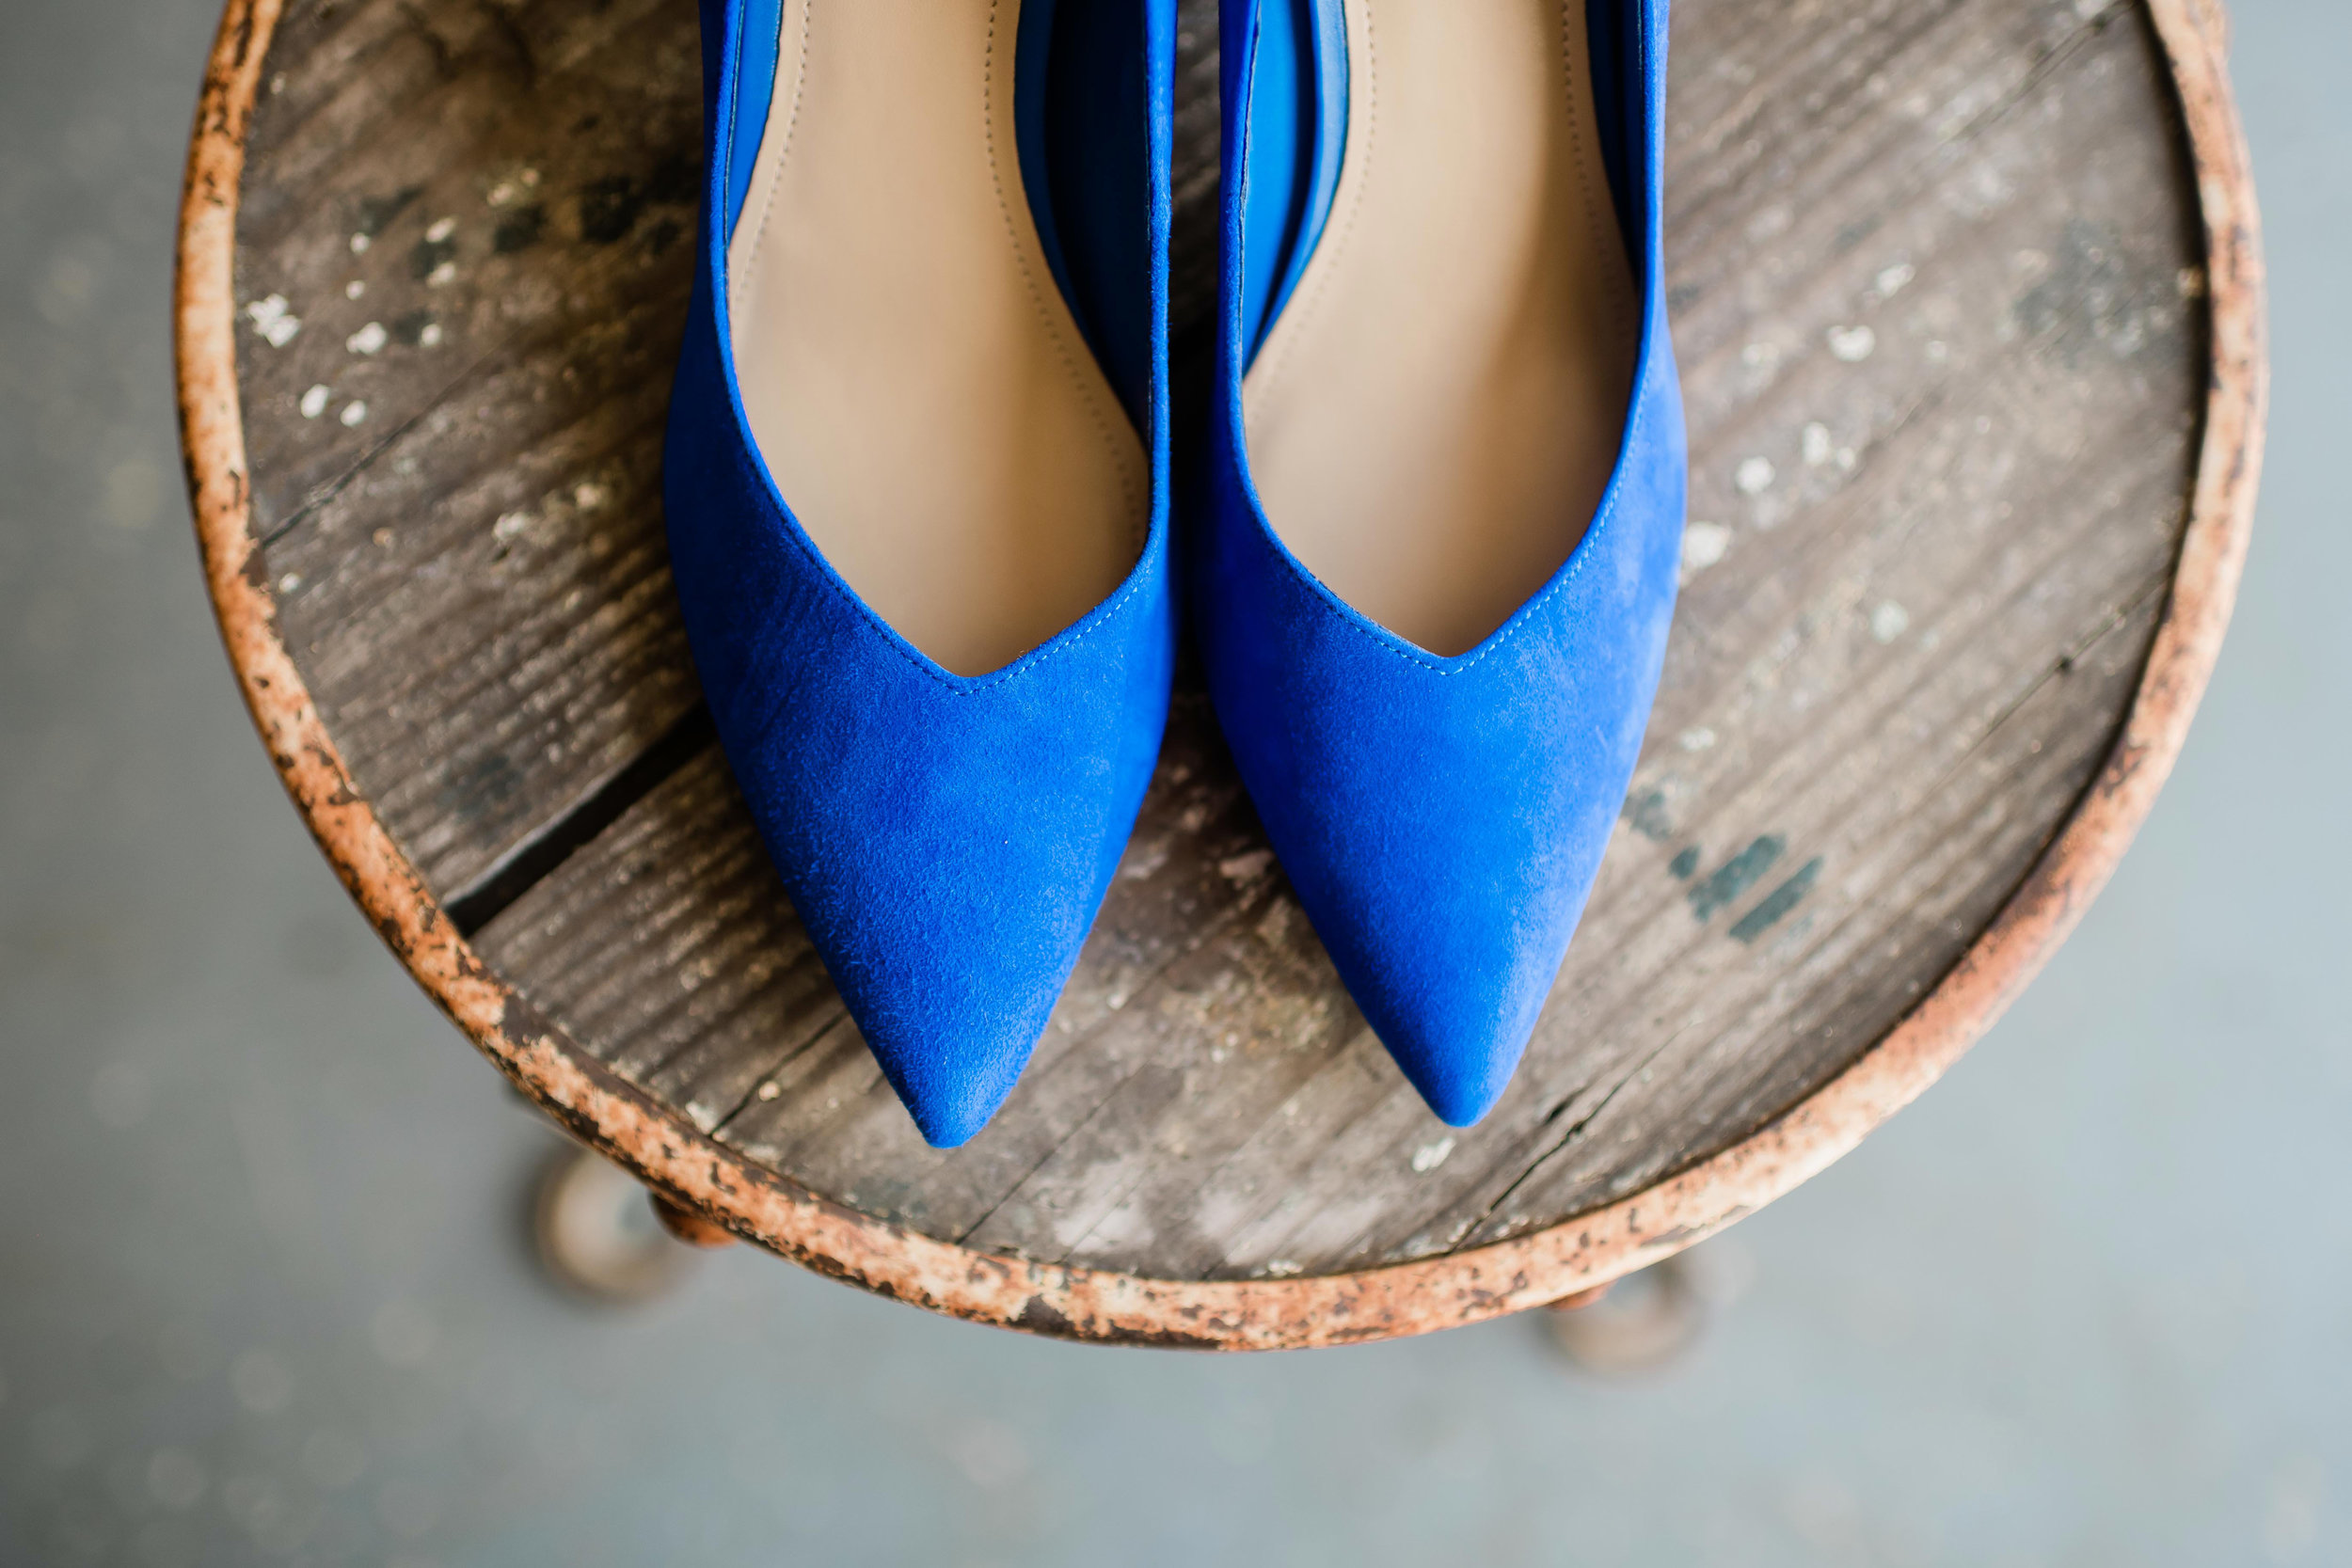 Blue bridal shoes sitting on rusty chair